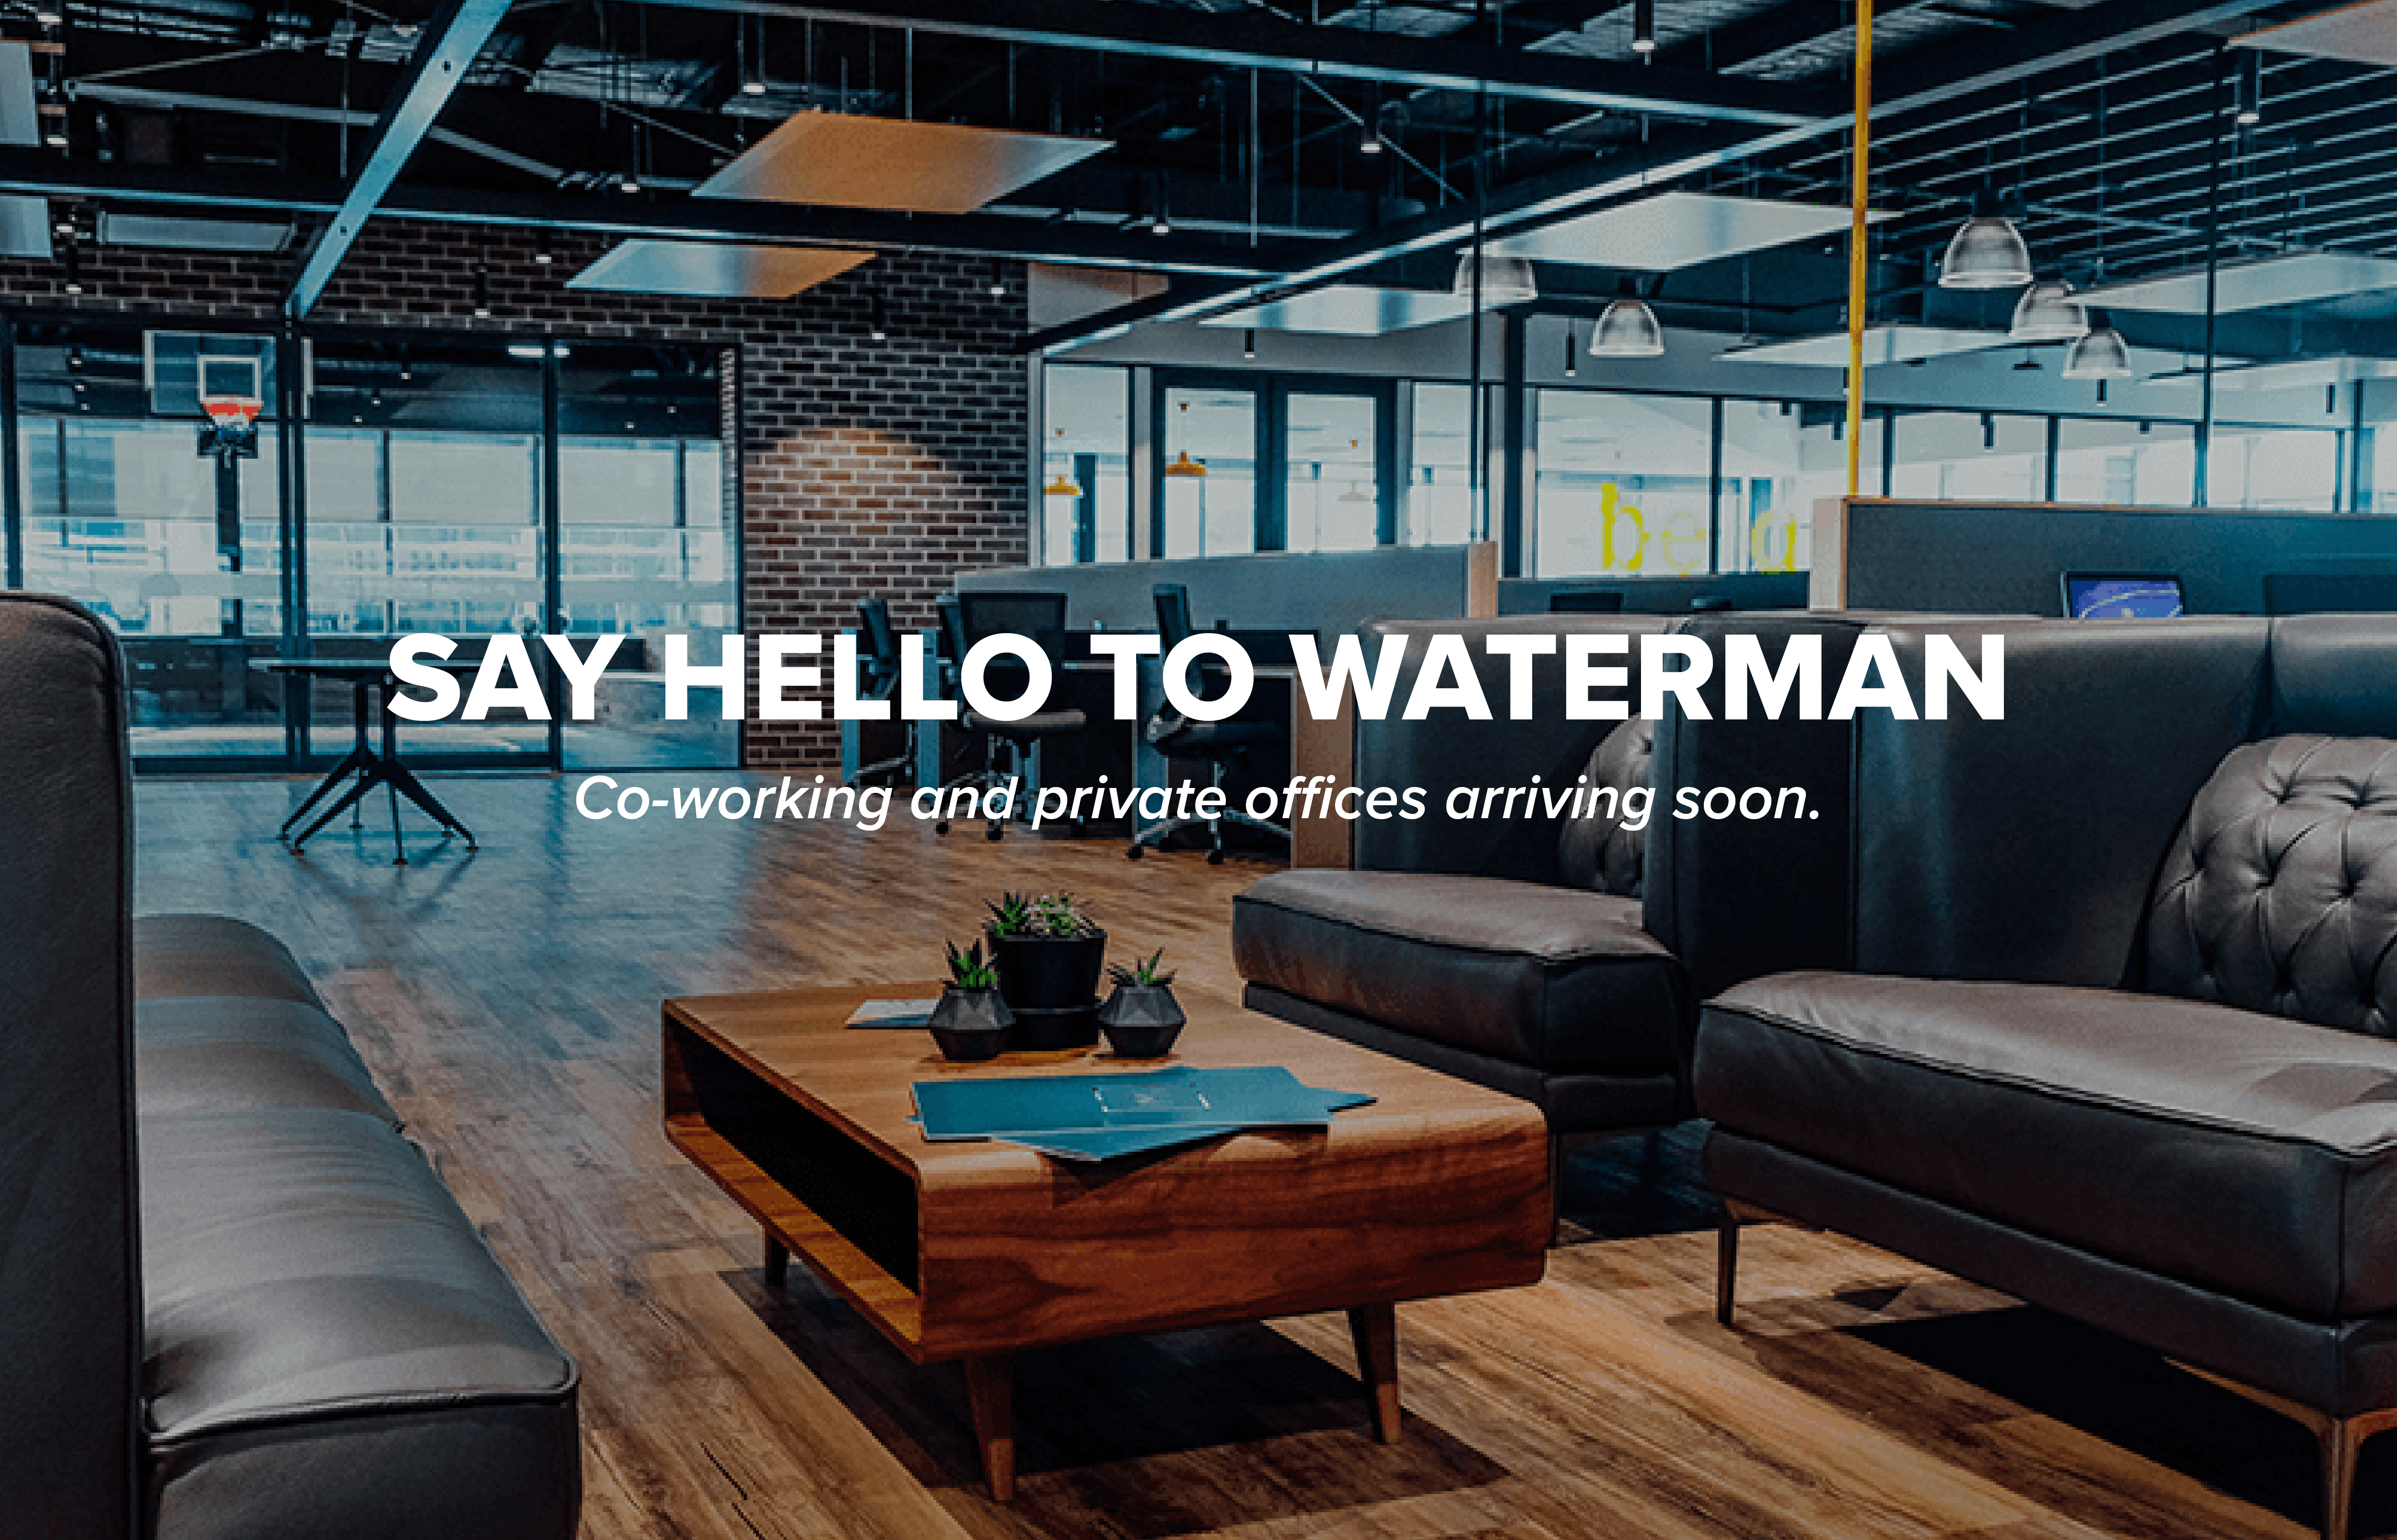 Waterman coming to Highpoint